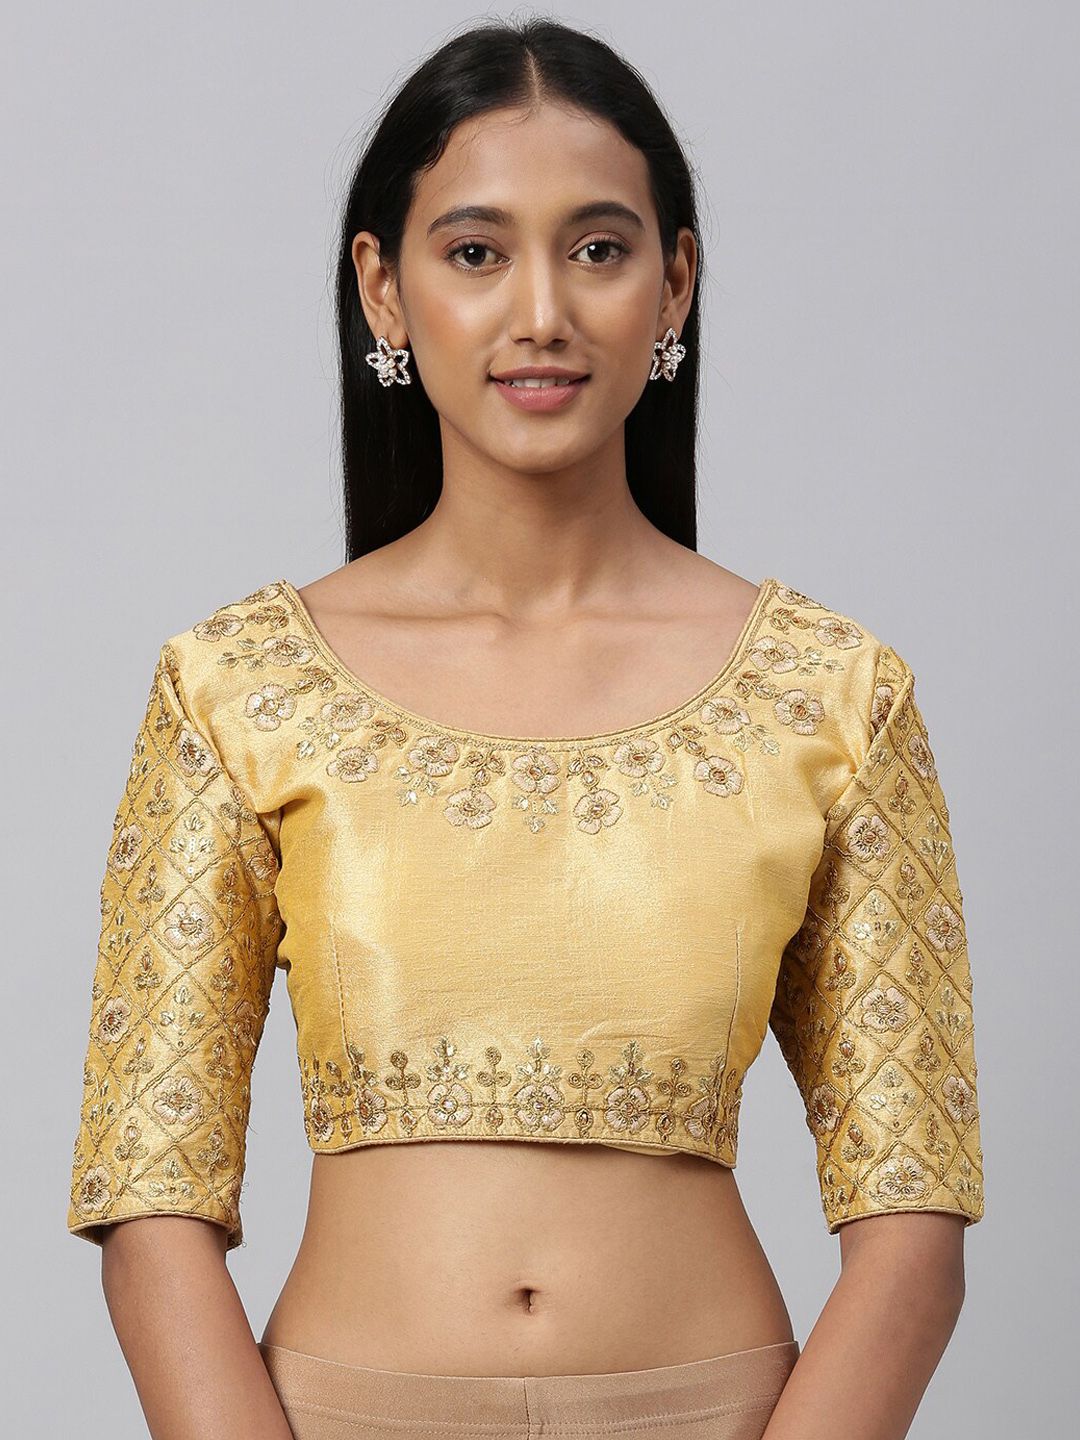 Amrutam Fab Women Beige & Gold-Coloured Embroidered Saree Blouse Price in India